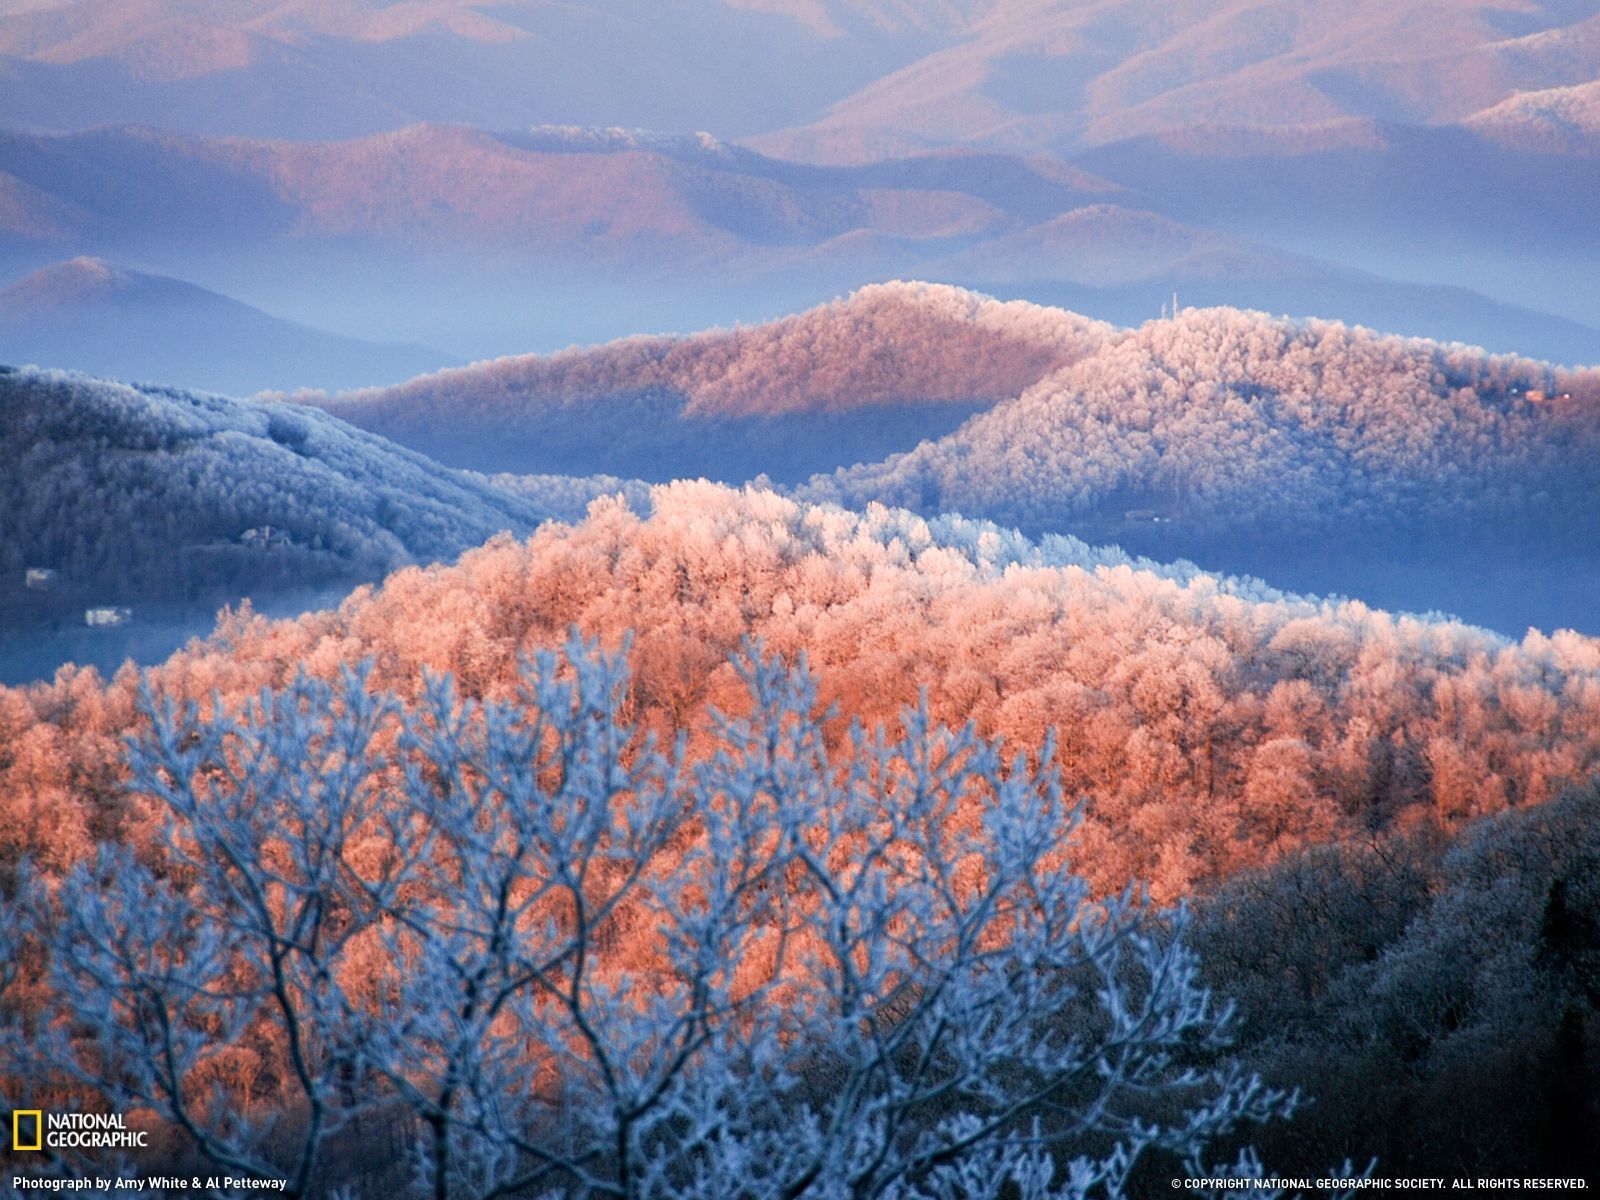 Wallpaper - National Geographic for Life in Color: Orange. Color of life, Mountain landscape, Blue ridge mountains